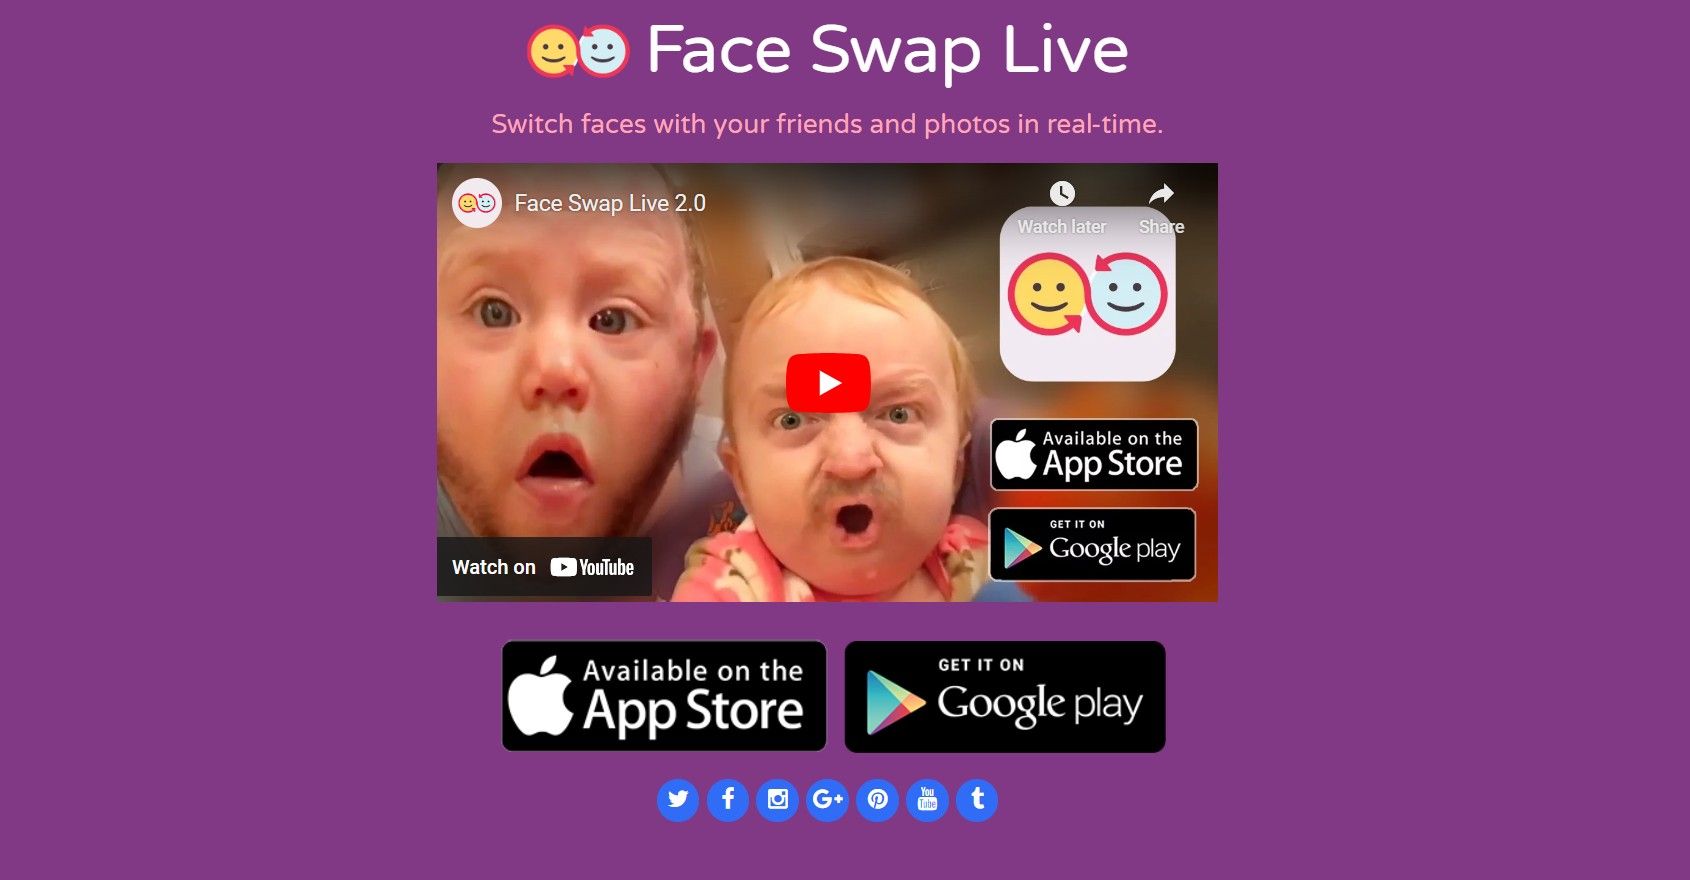 Face Swap Live - Real-Time Face Swapping App for Interactive Fun